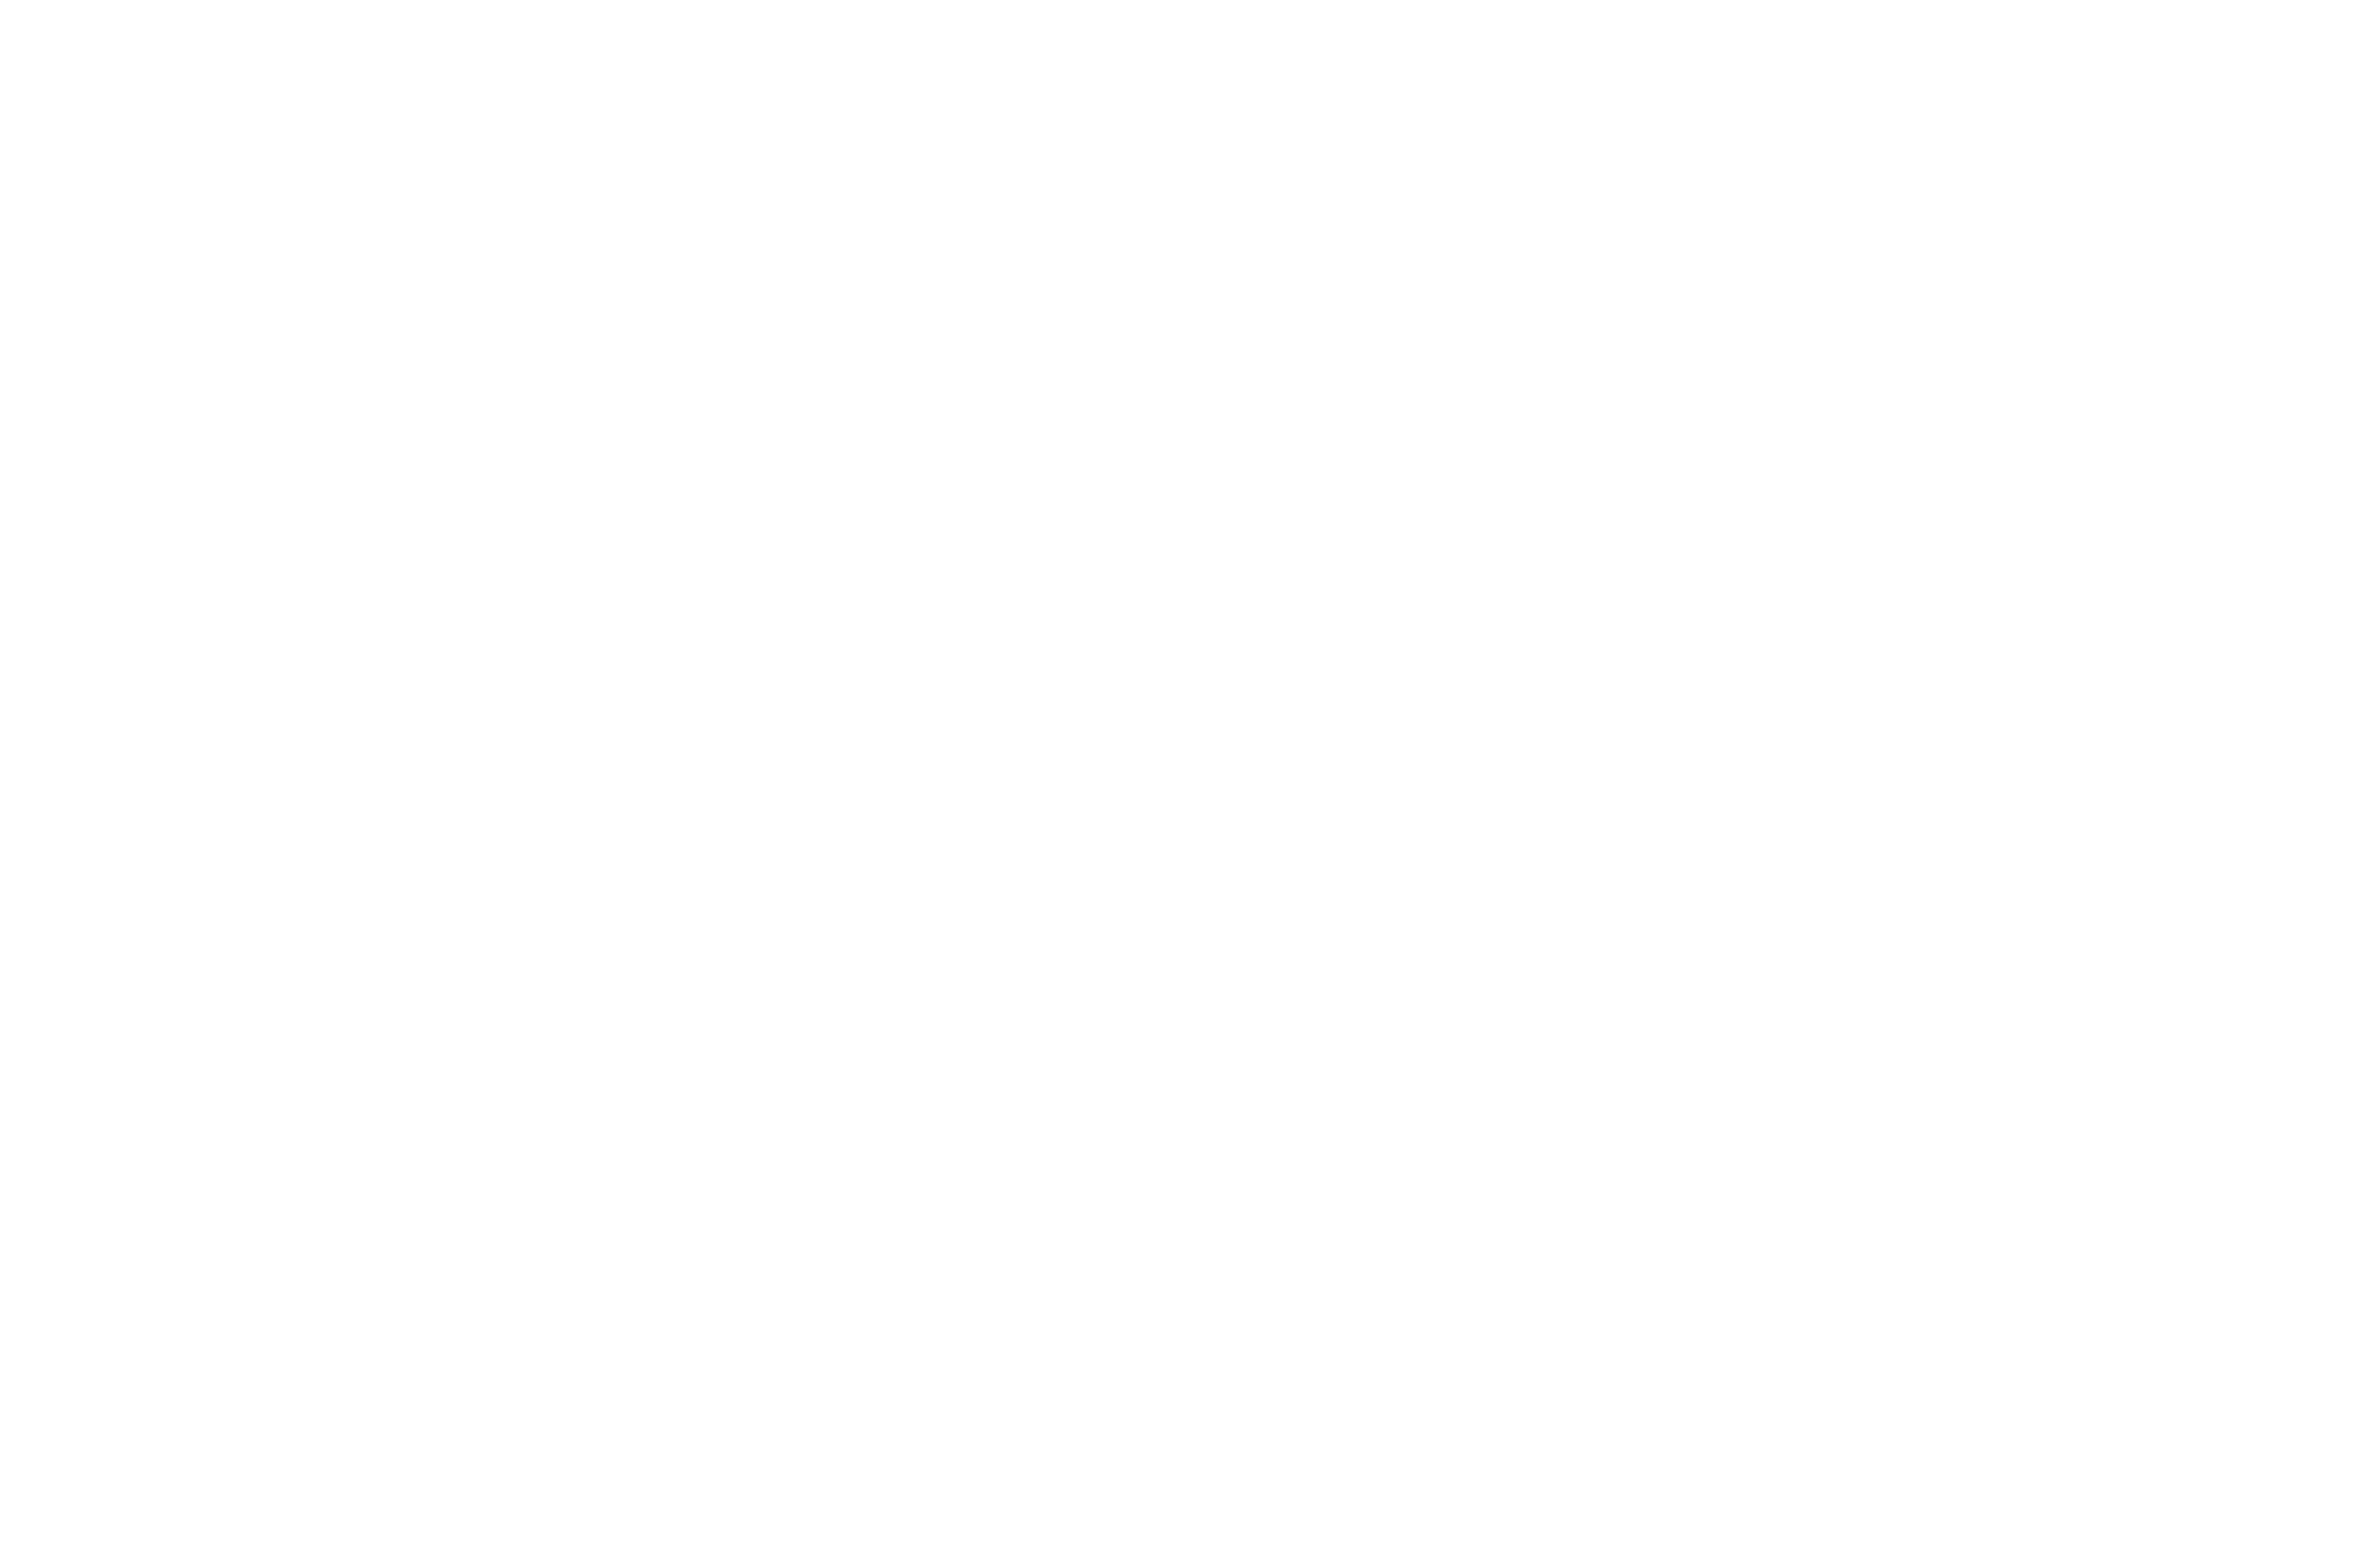 Joy Homes Shelters,Low-Income Housing,Affordable Living Solutions,Housing Assistance,Supportive Housing,Empathetic Housing Solutions,Respectful Community Living,Self-Improvement in Housing,Pride of Ownership for Low Income,Accessible Housing Options,Financial Aid for Housing,Community Support Services,Housing for Those in Need